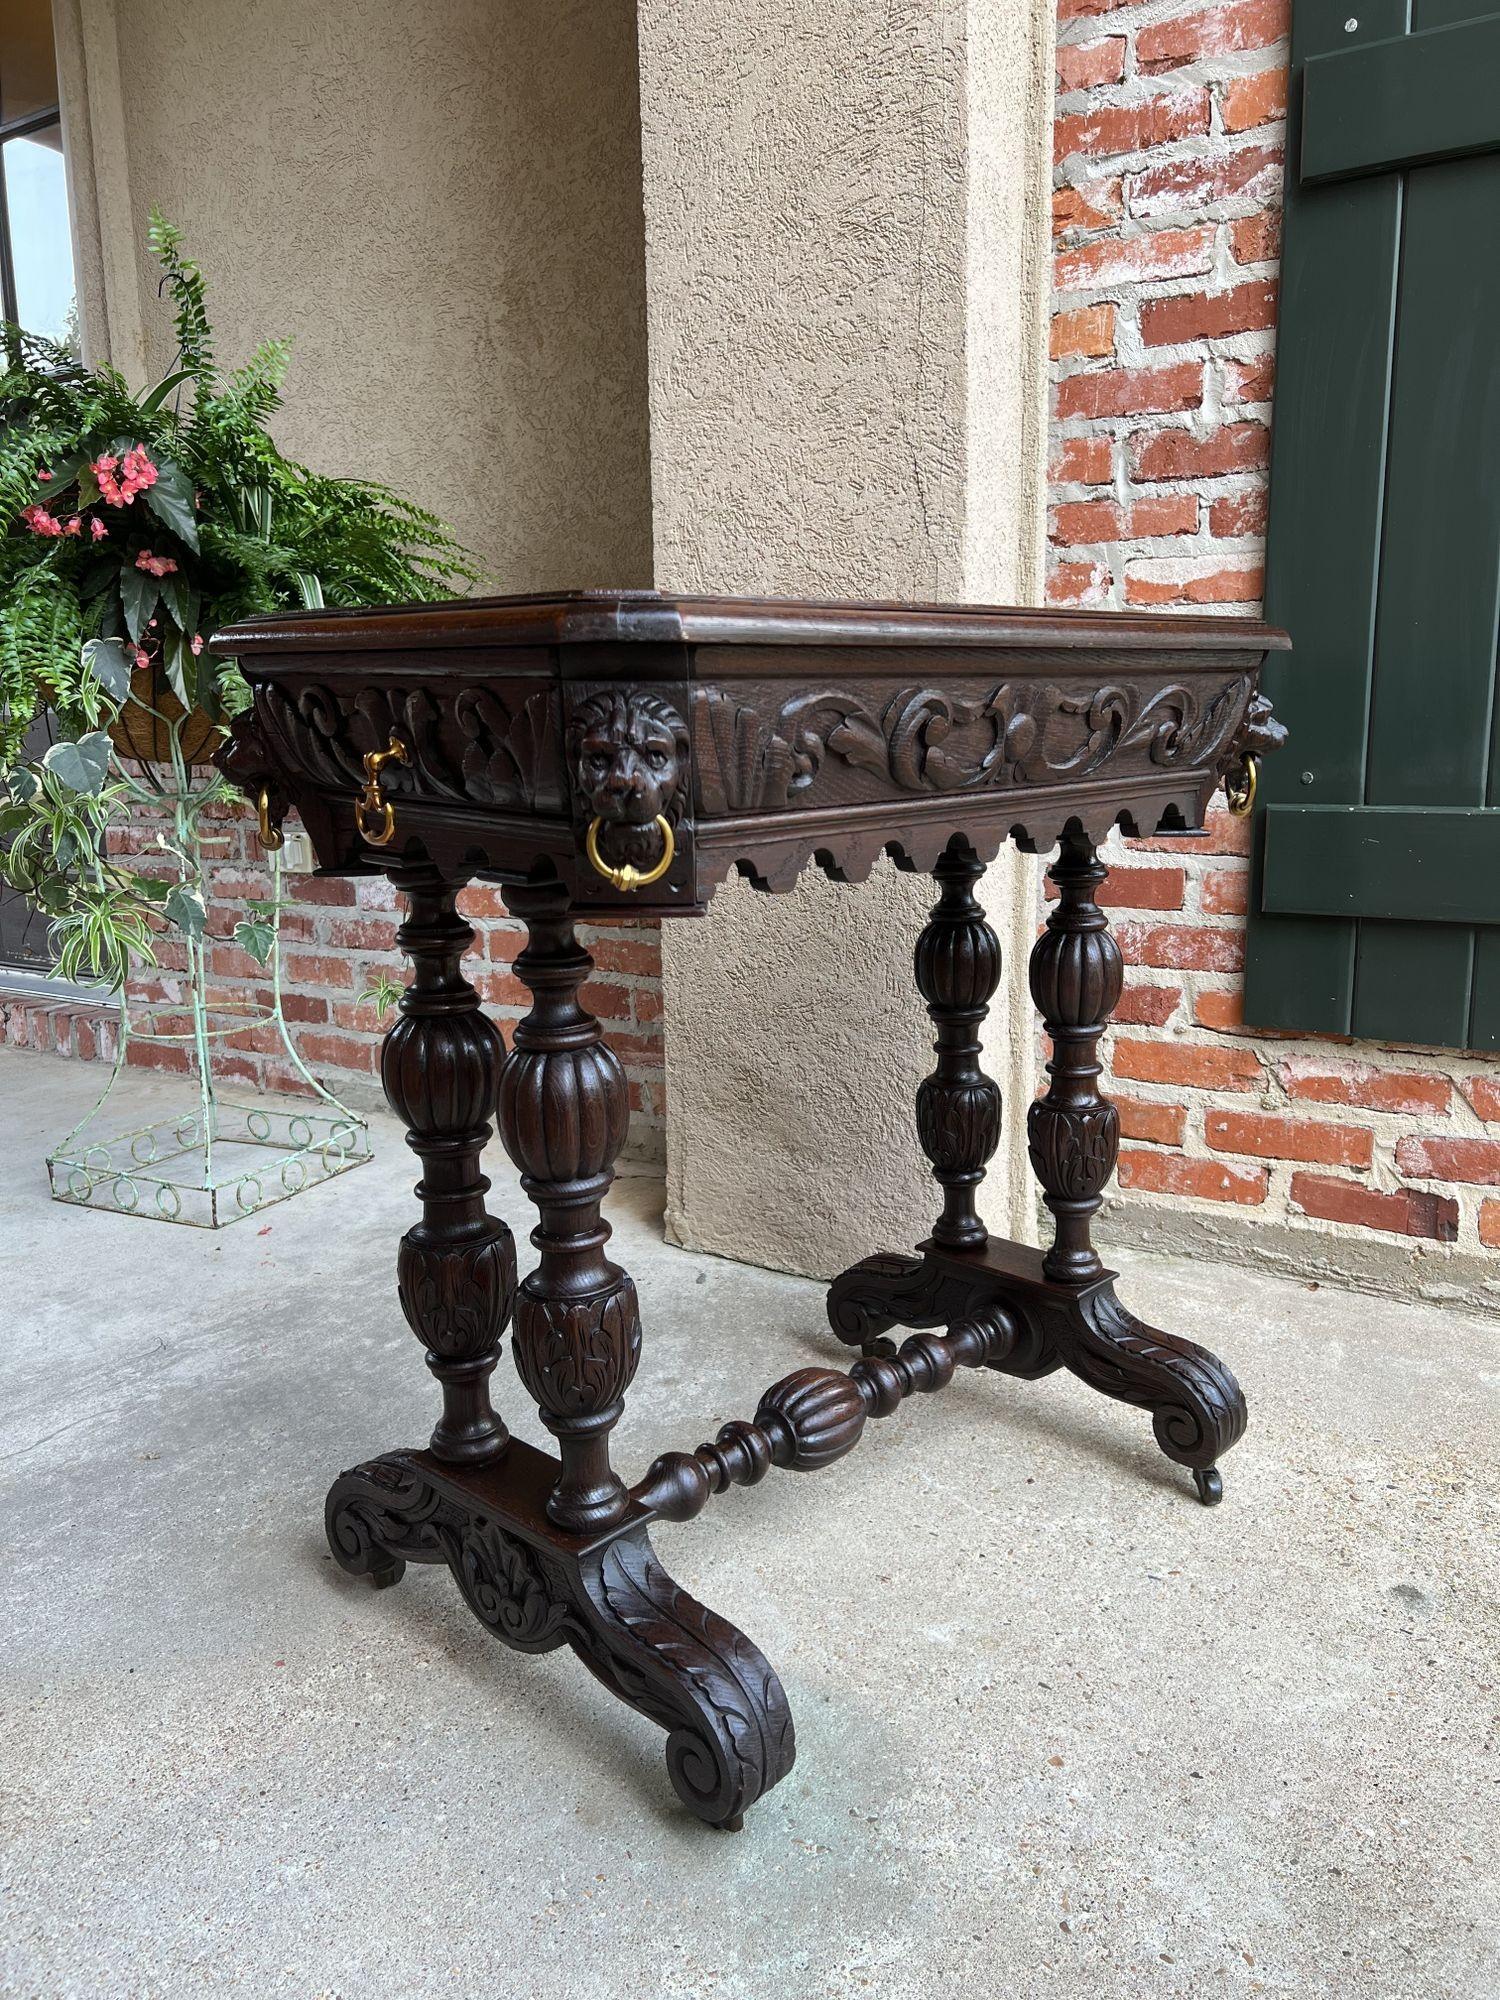 19th century French Carved Oak Dolphin Library Table Petite Desk Renaissance.
 
Direct from France, an elegant, and petite, antique French carved sofa table or 